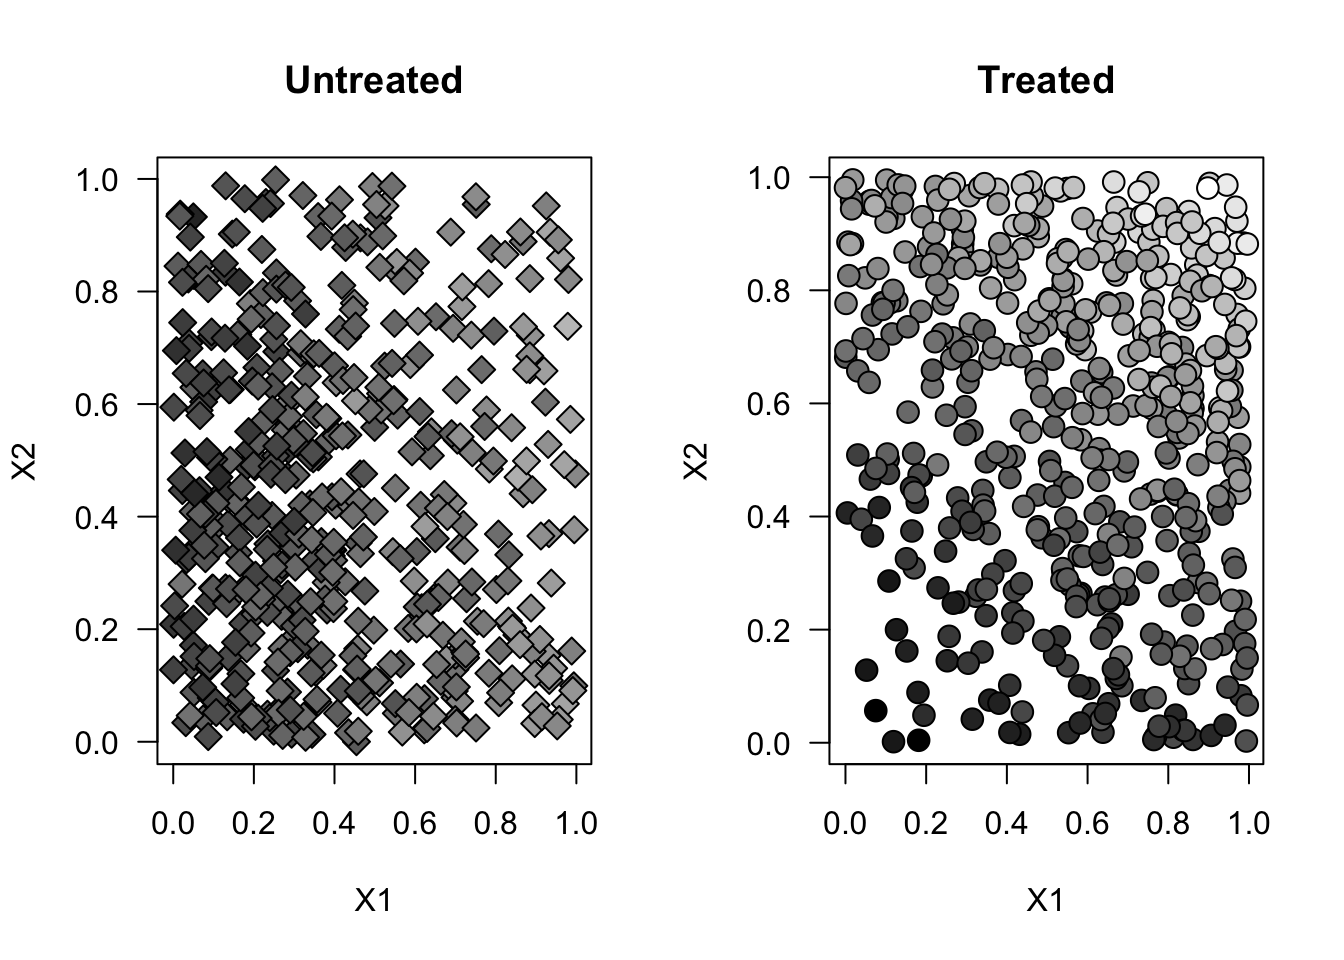 Simulated data by treated and untreated (observational setting)